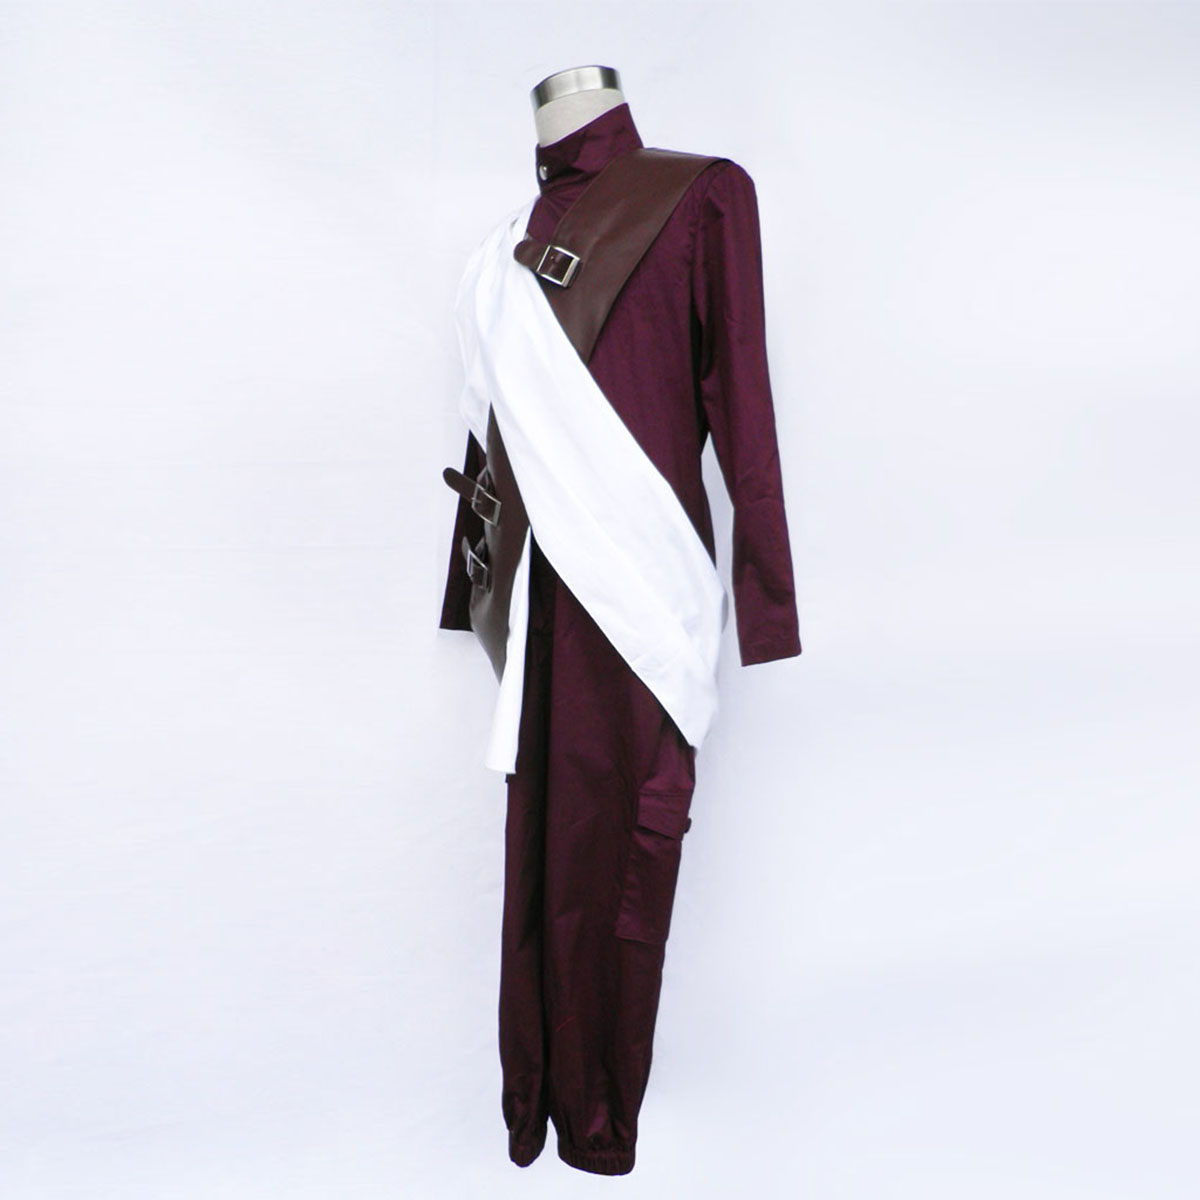 Naruto Gaara 3 Anime Cosplay Costumes Outfit